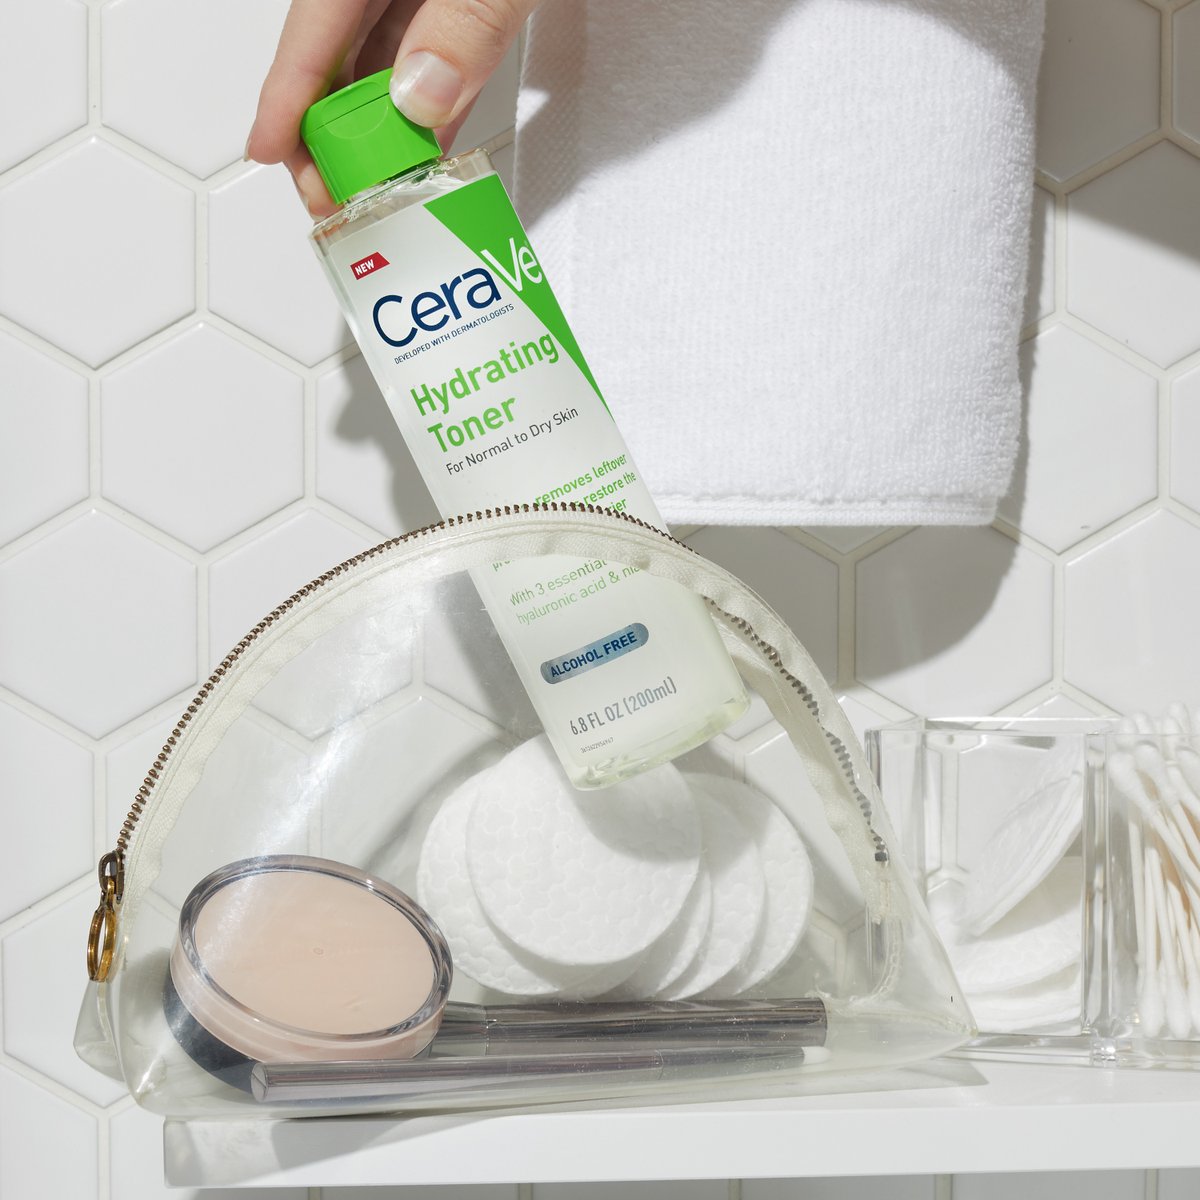 Keep your skin cleansed, nourished & refreshed with Hydrating Toner 💦 1️⃣ Saturate a cotton pad 2️⃣ Gently wipe the pad over your skin until completely free of residue Use Hydrating Toner in the ☀️ & 🌙 to help moisturize & maintain the skin barrier! #CeraVe #DevelopedWithDerms